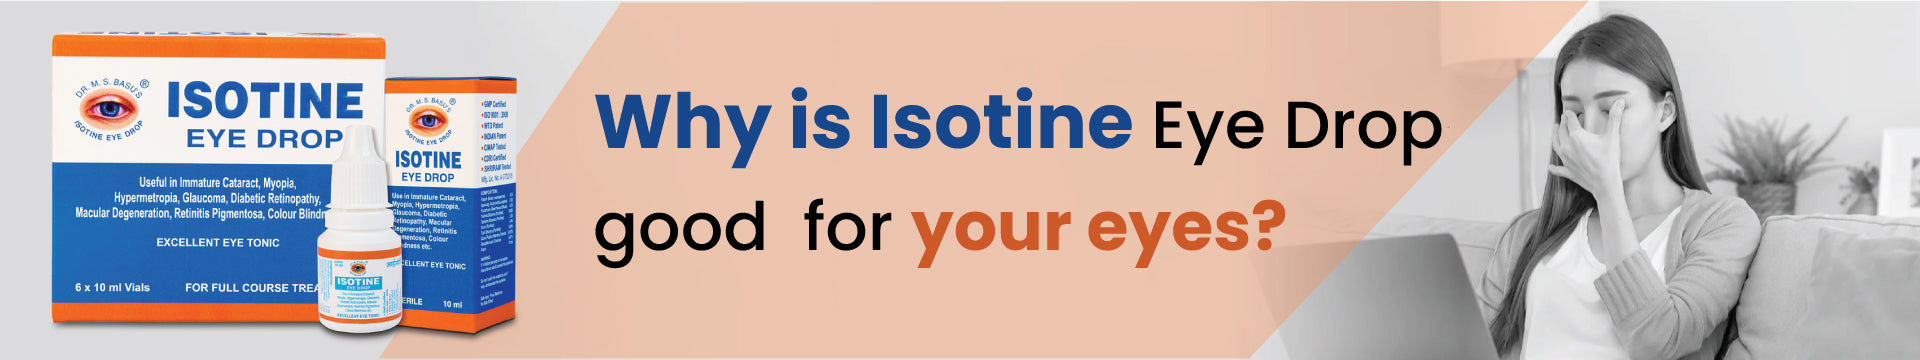 Why is Isotine Eye Drop Good  for Your Eyes?